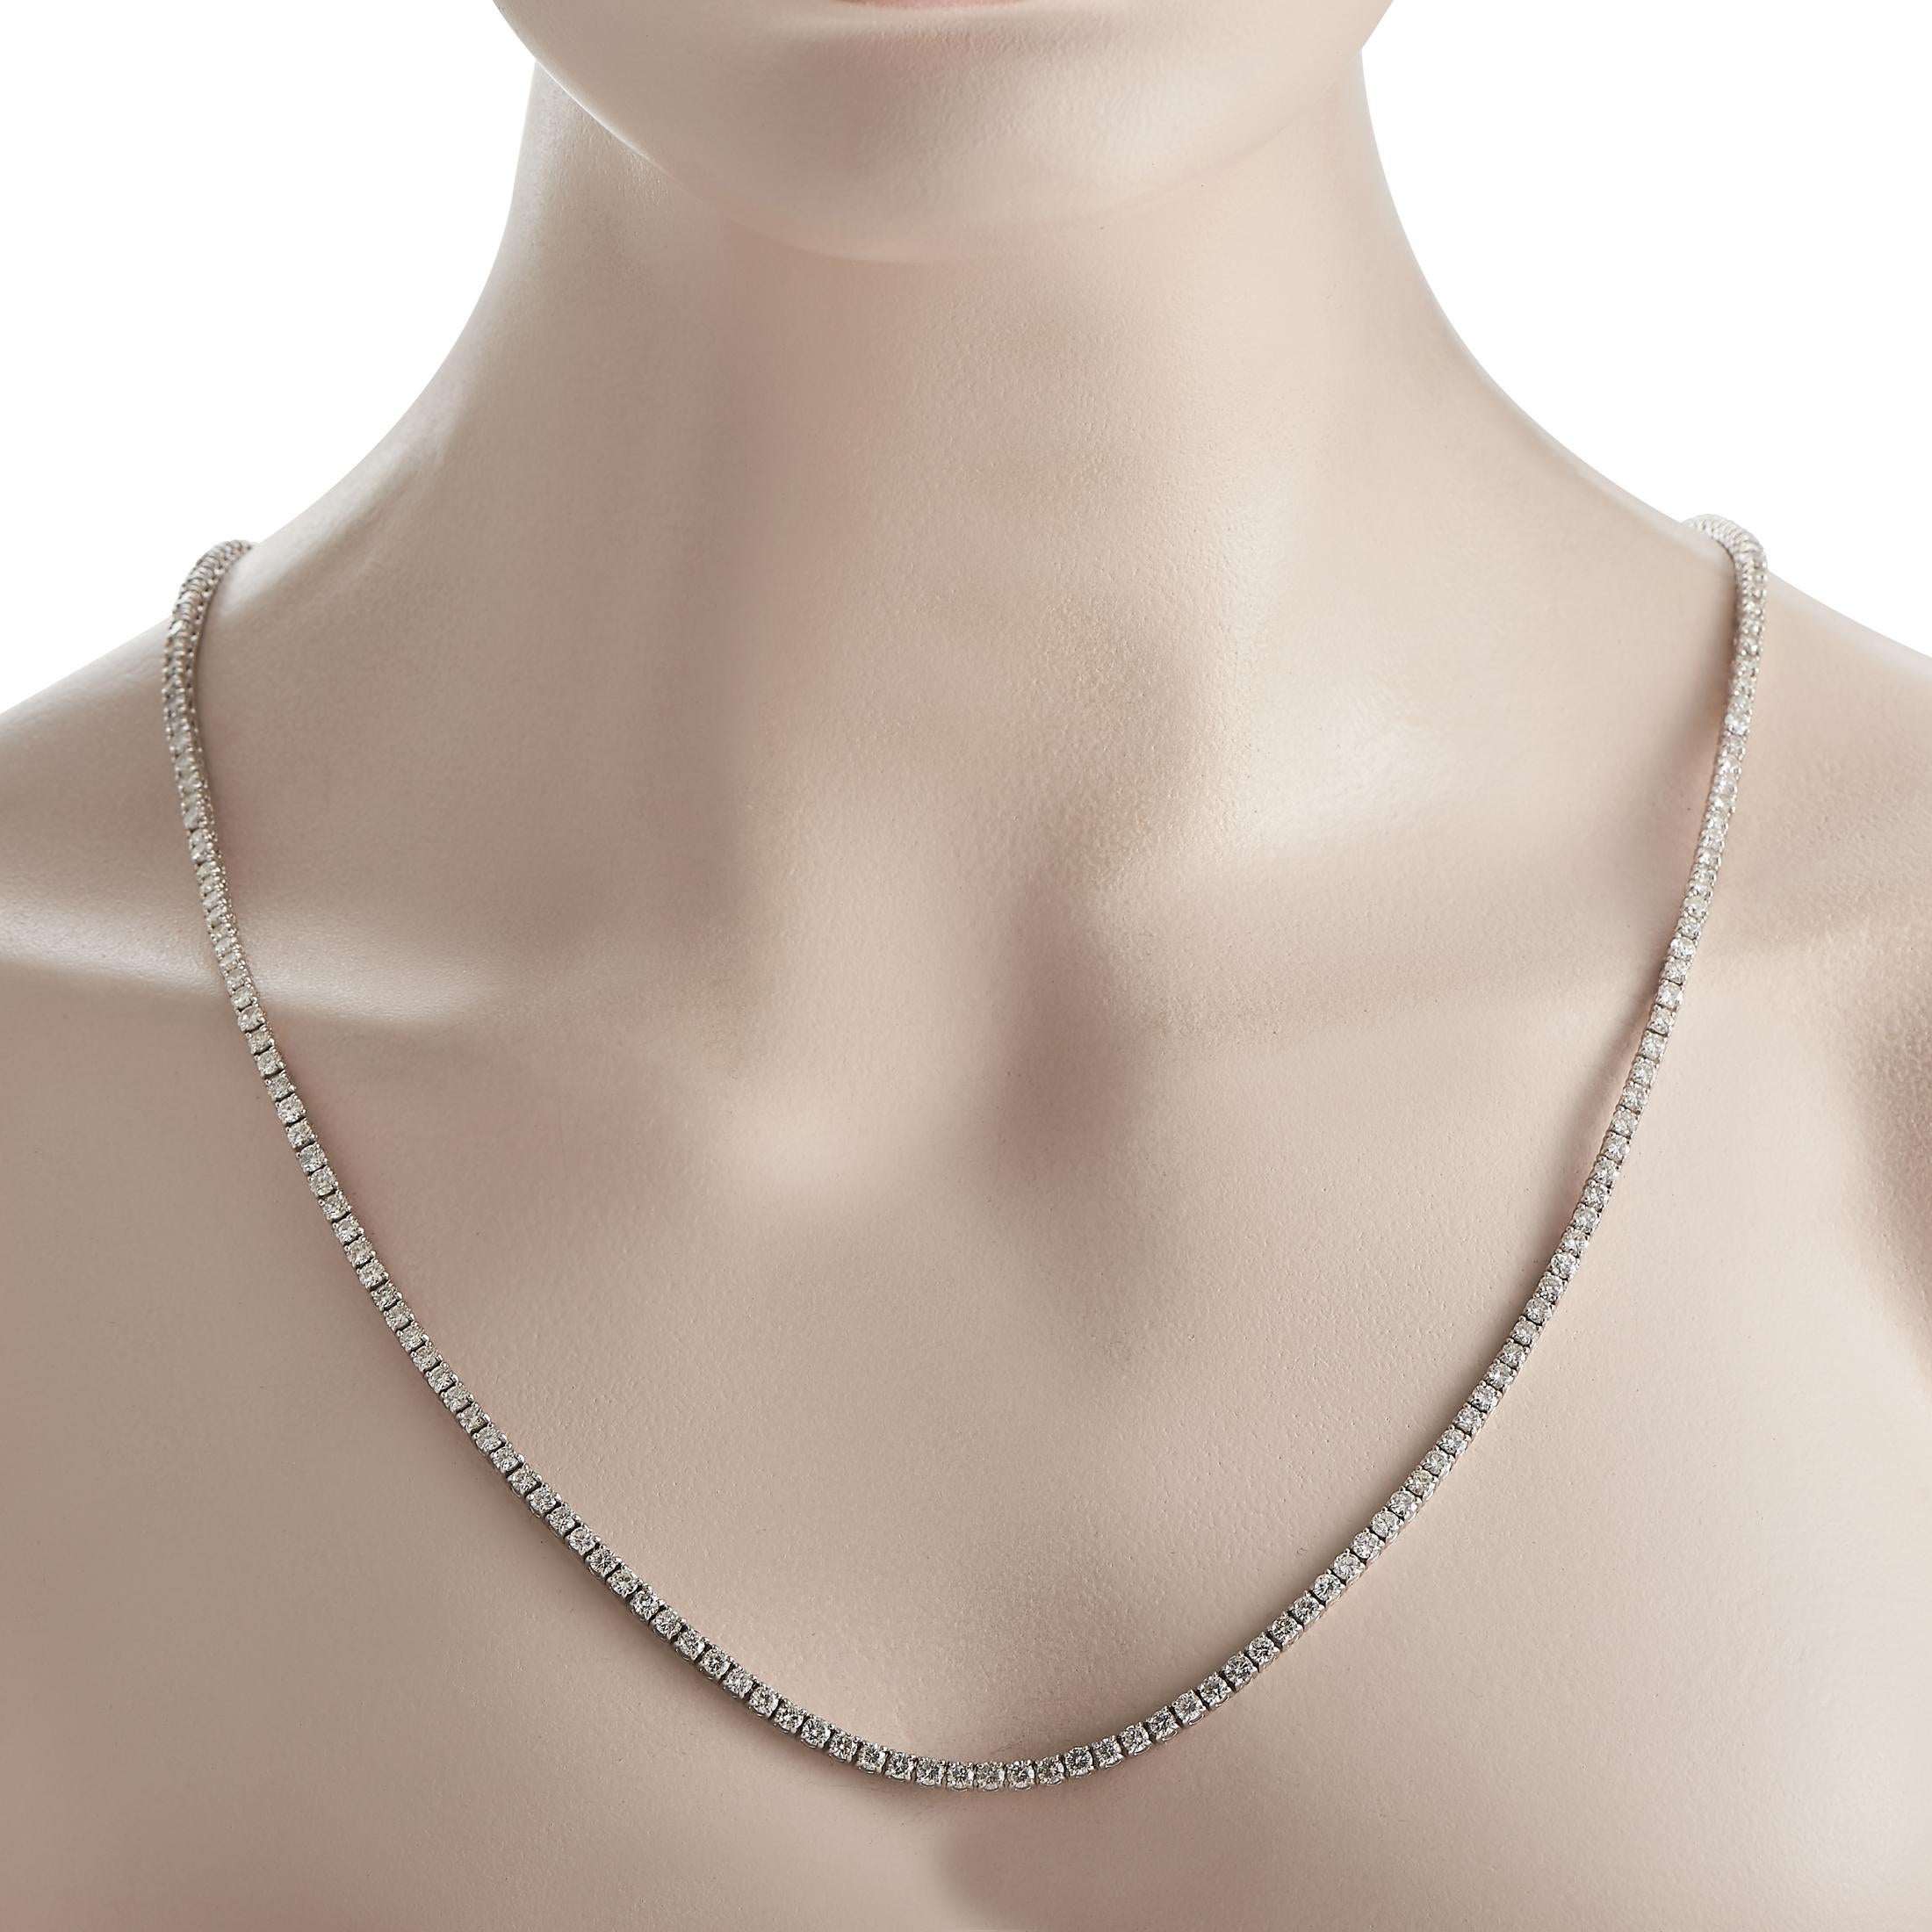 With captivating brilliance, this long tennis necklace is undoubtedly a standout choice for a special occasion. This piece is finely crafted in 18K white gold and features round diamonds in individual prong settings linked together to form a